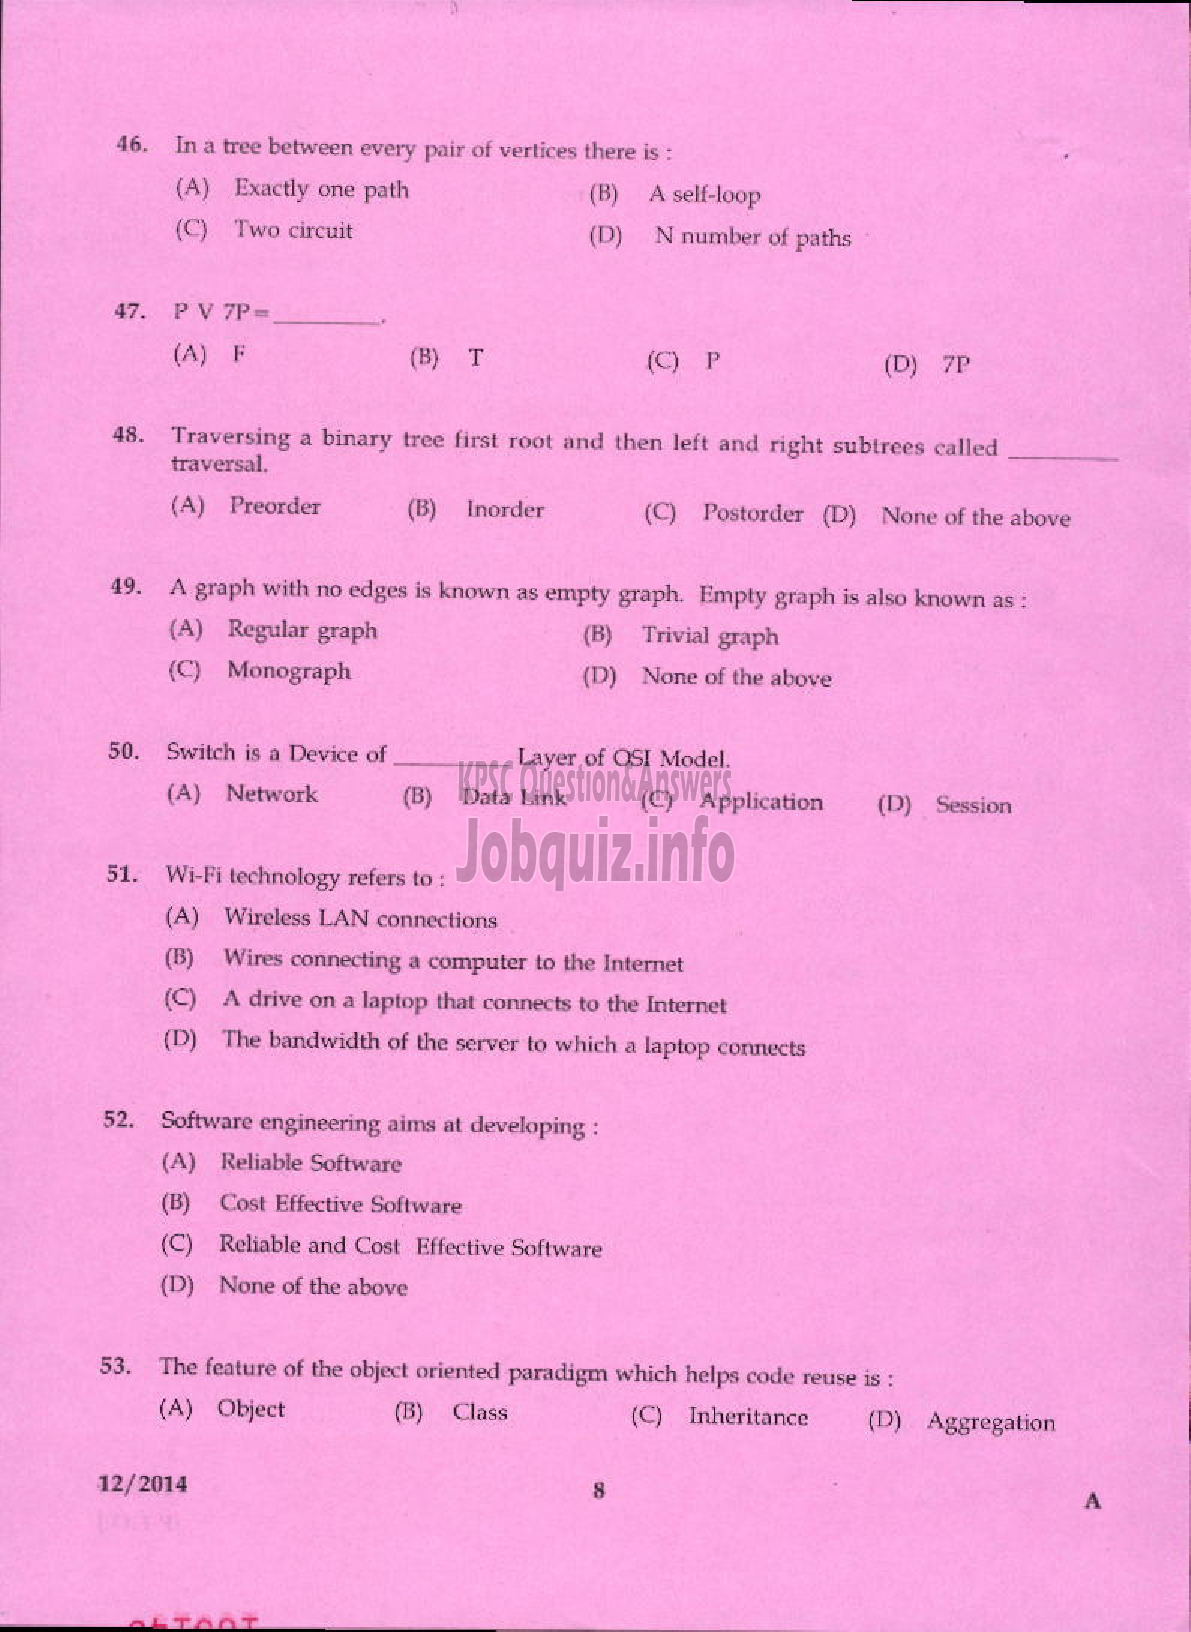 Kerala PSC Question Paper - VOCATIONAL INSTRUCTOR IN COMPUTER APPLICATION VHSE-6